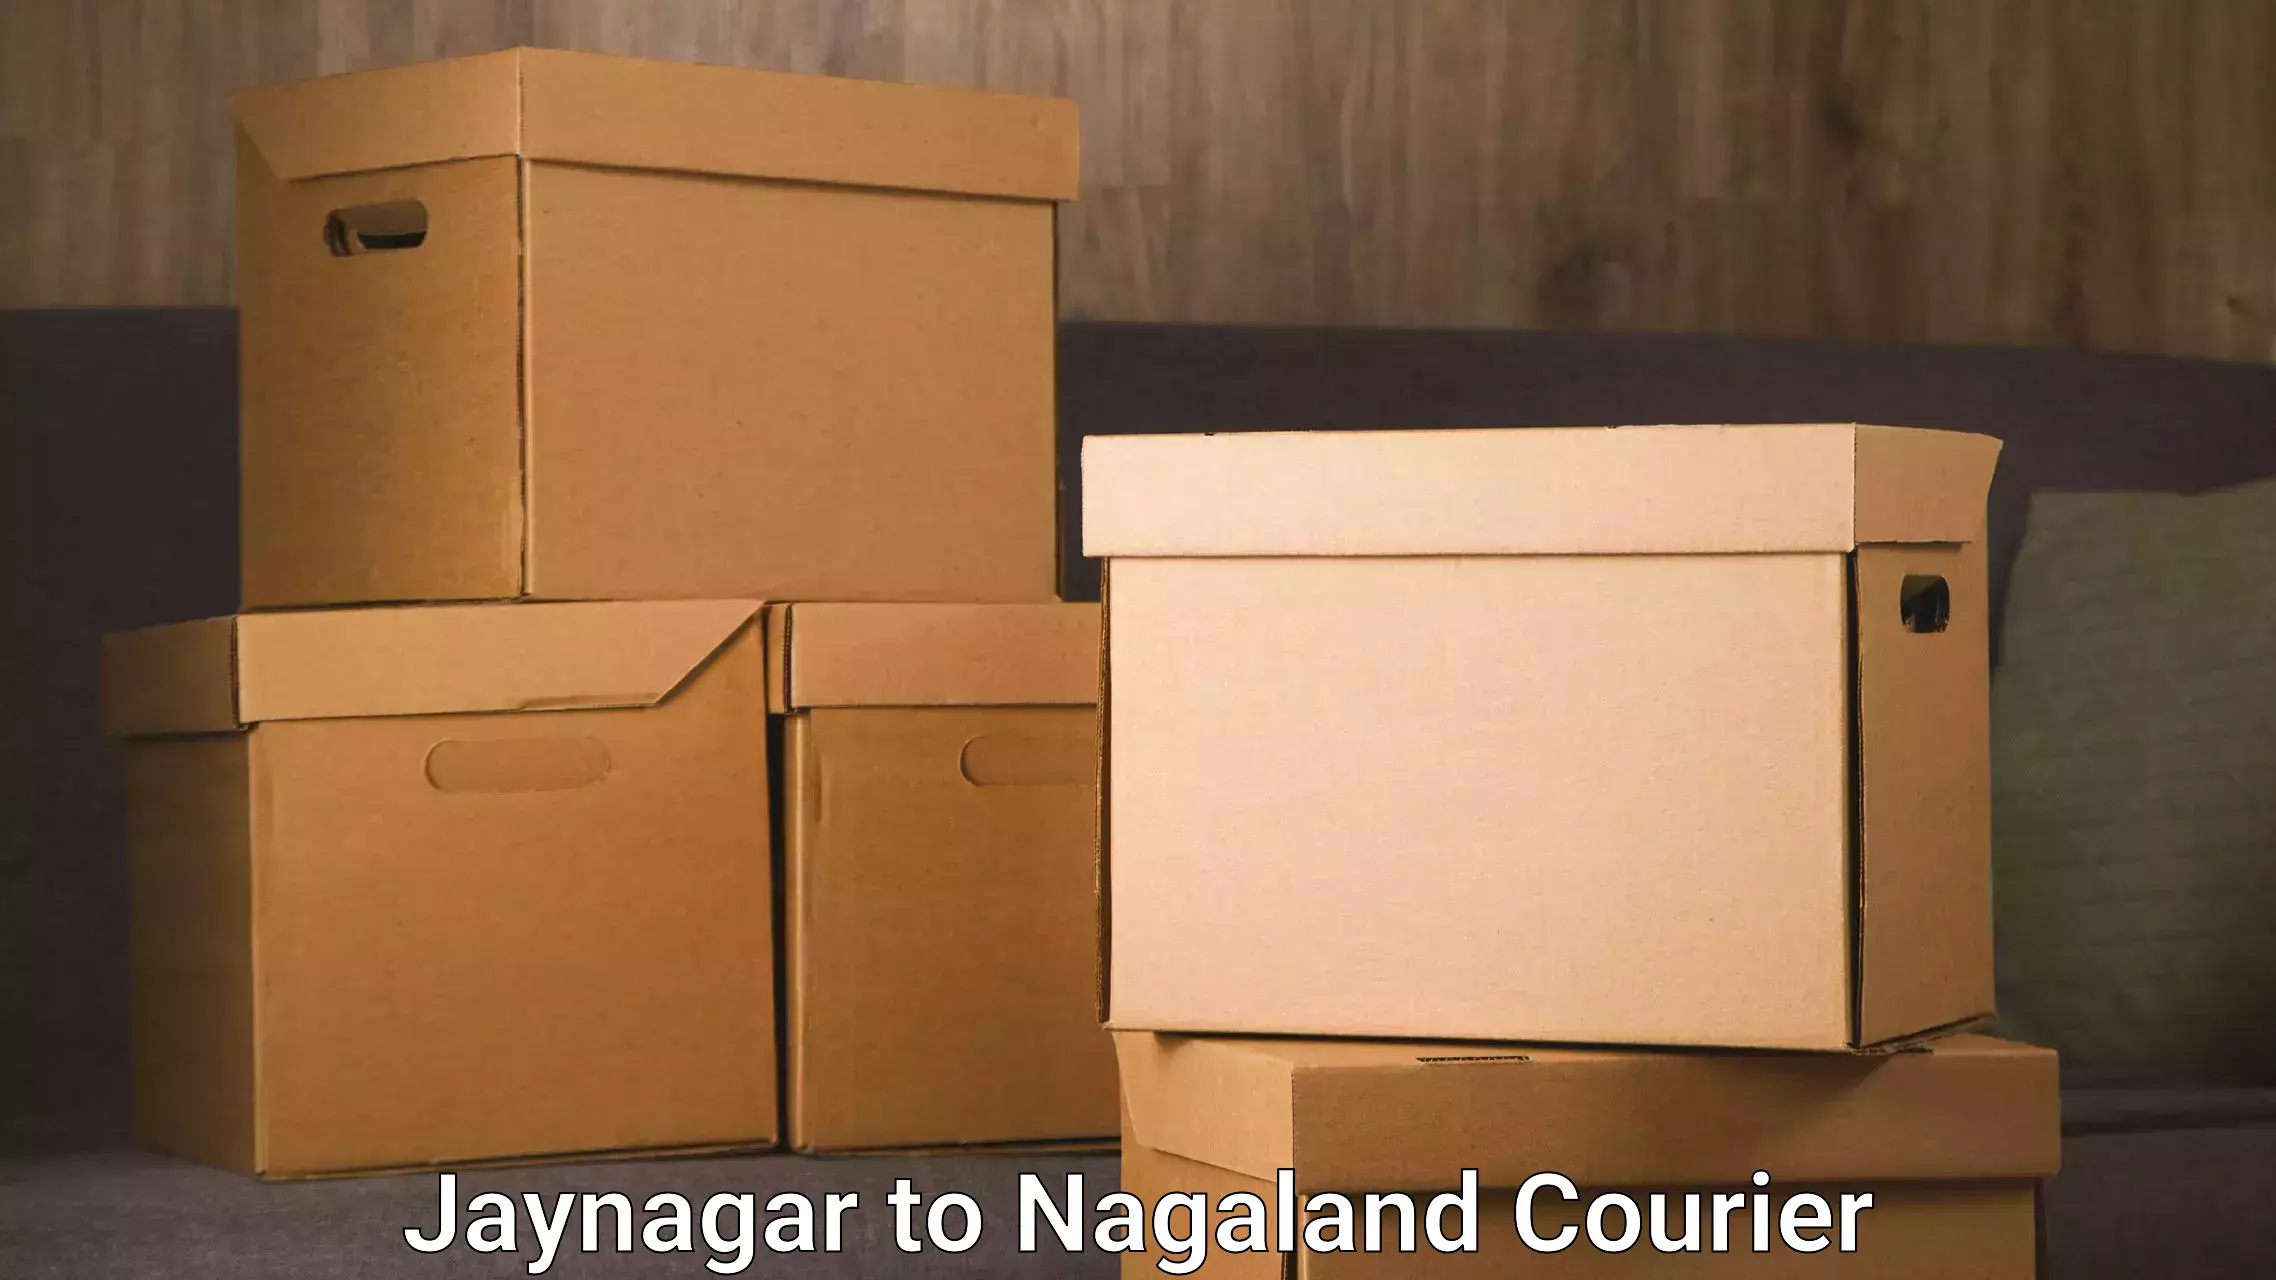 Trusted relocation experts Jaynagar to Nagaland